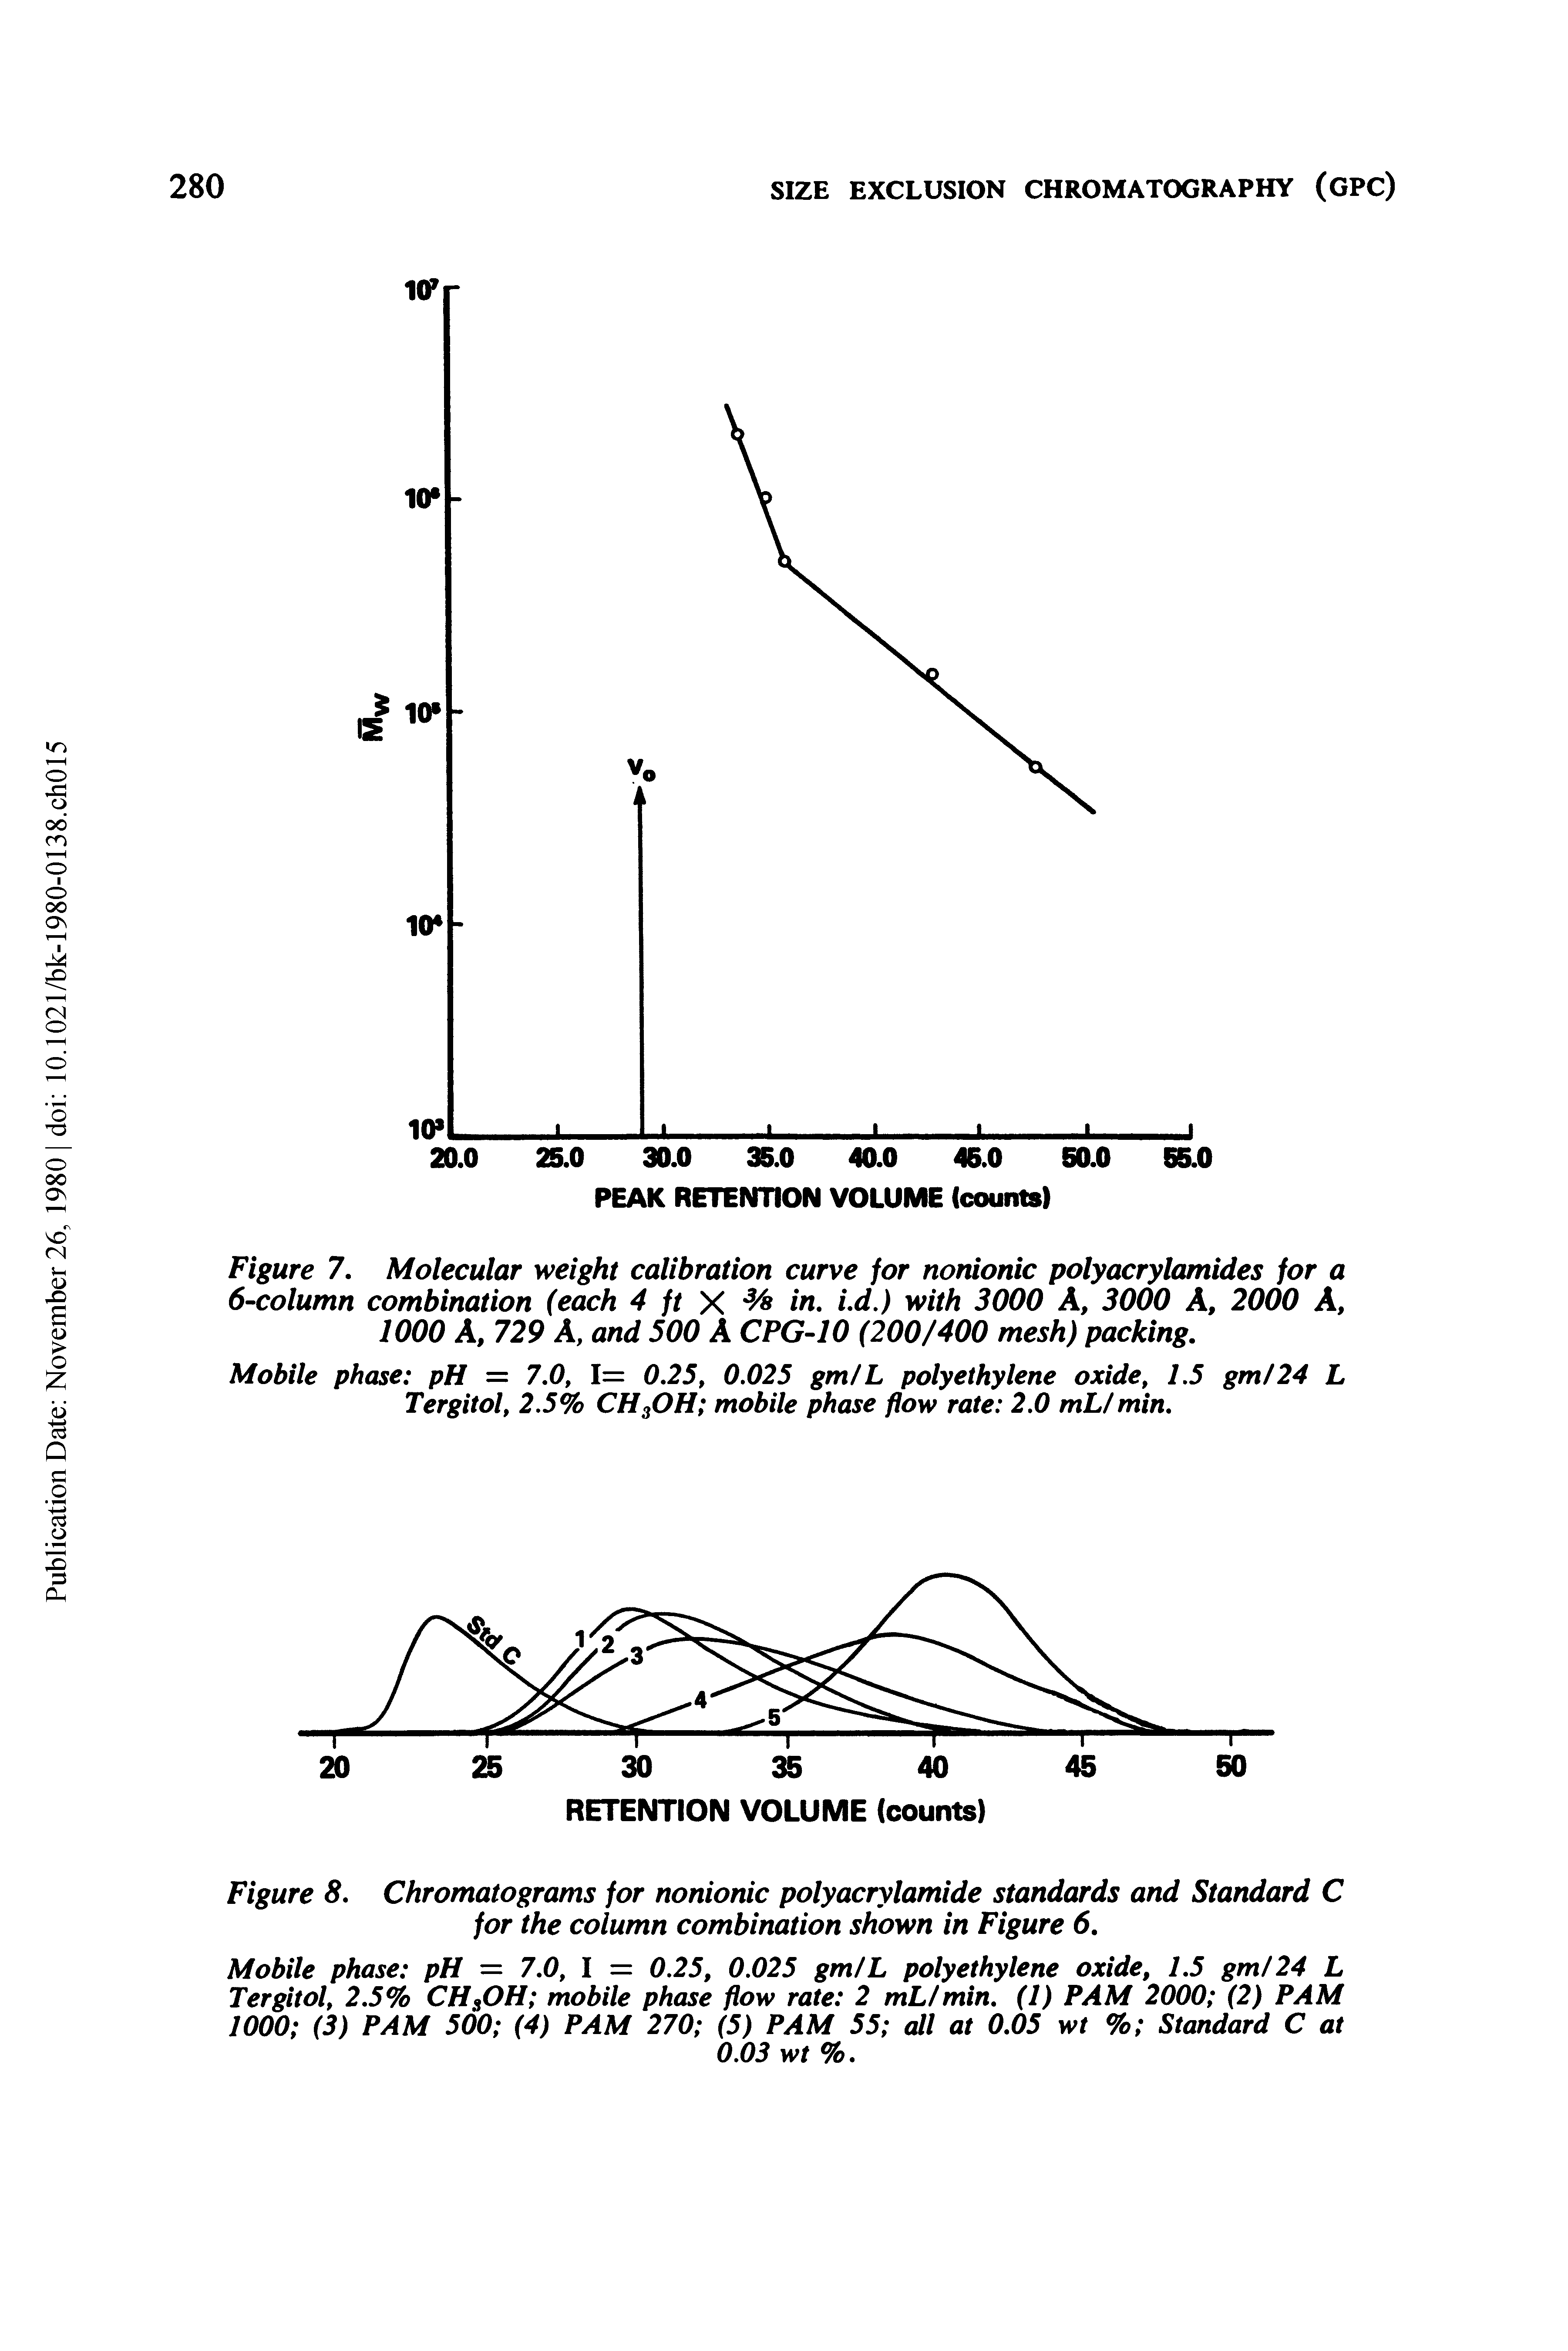 Figure 8. Chromatograms for nonionic polyacrylamide standards and Standard C for the column combination shown in Figure 6.